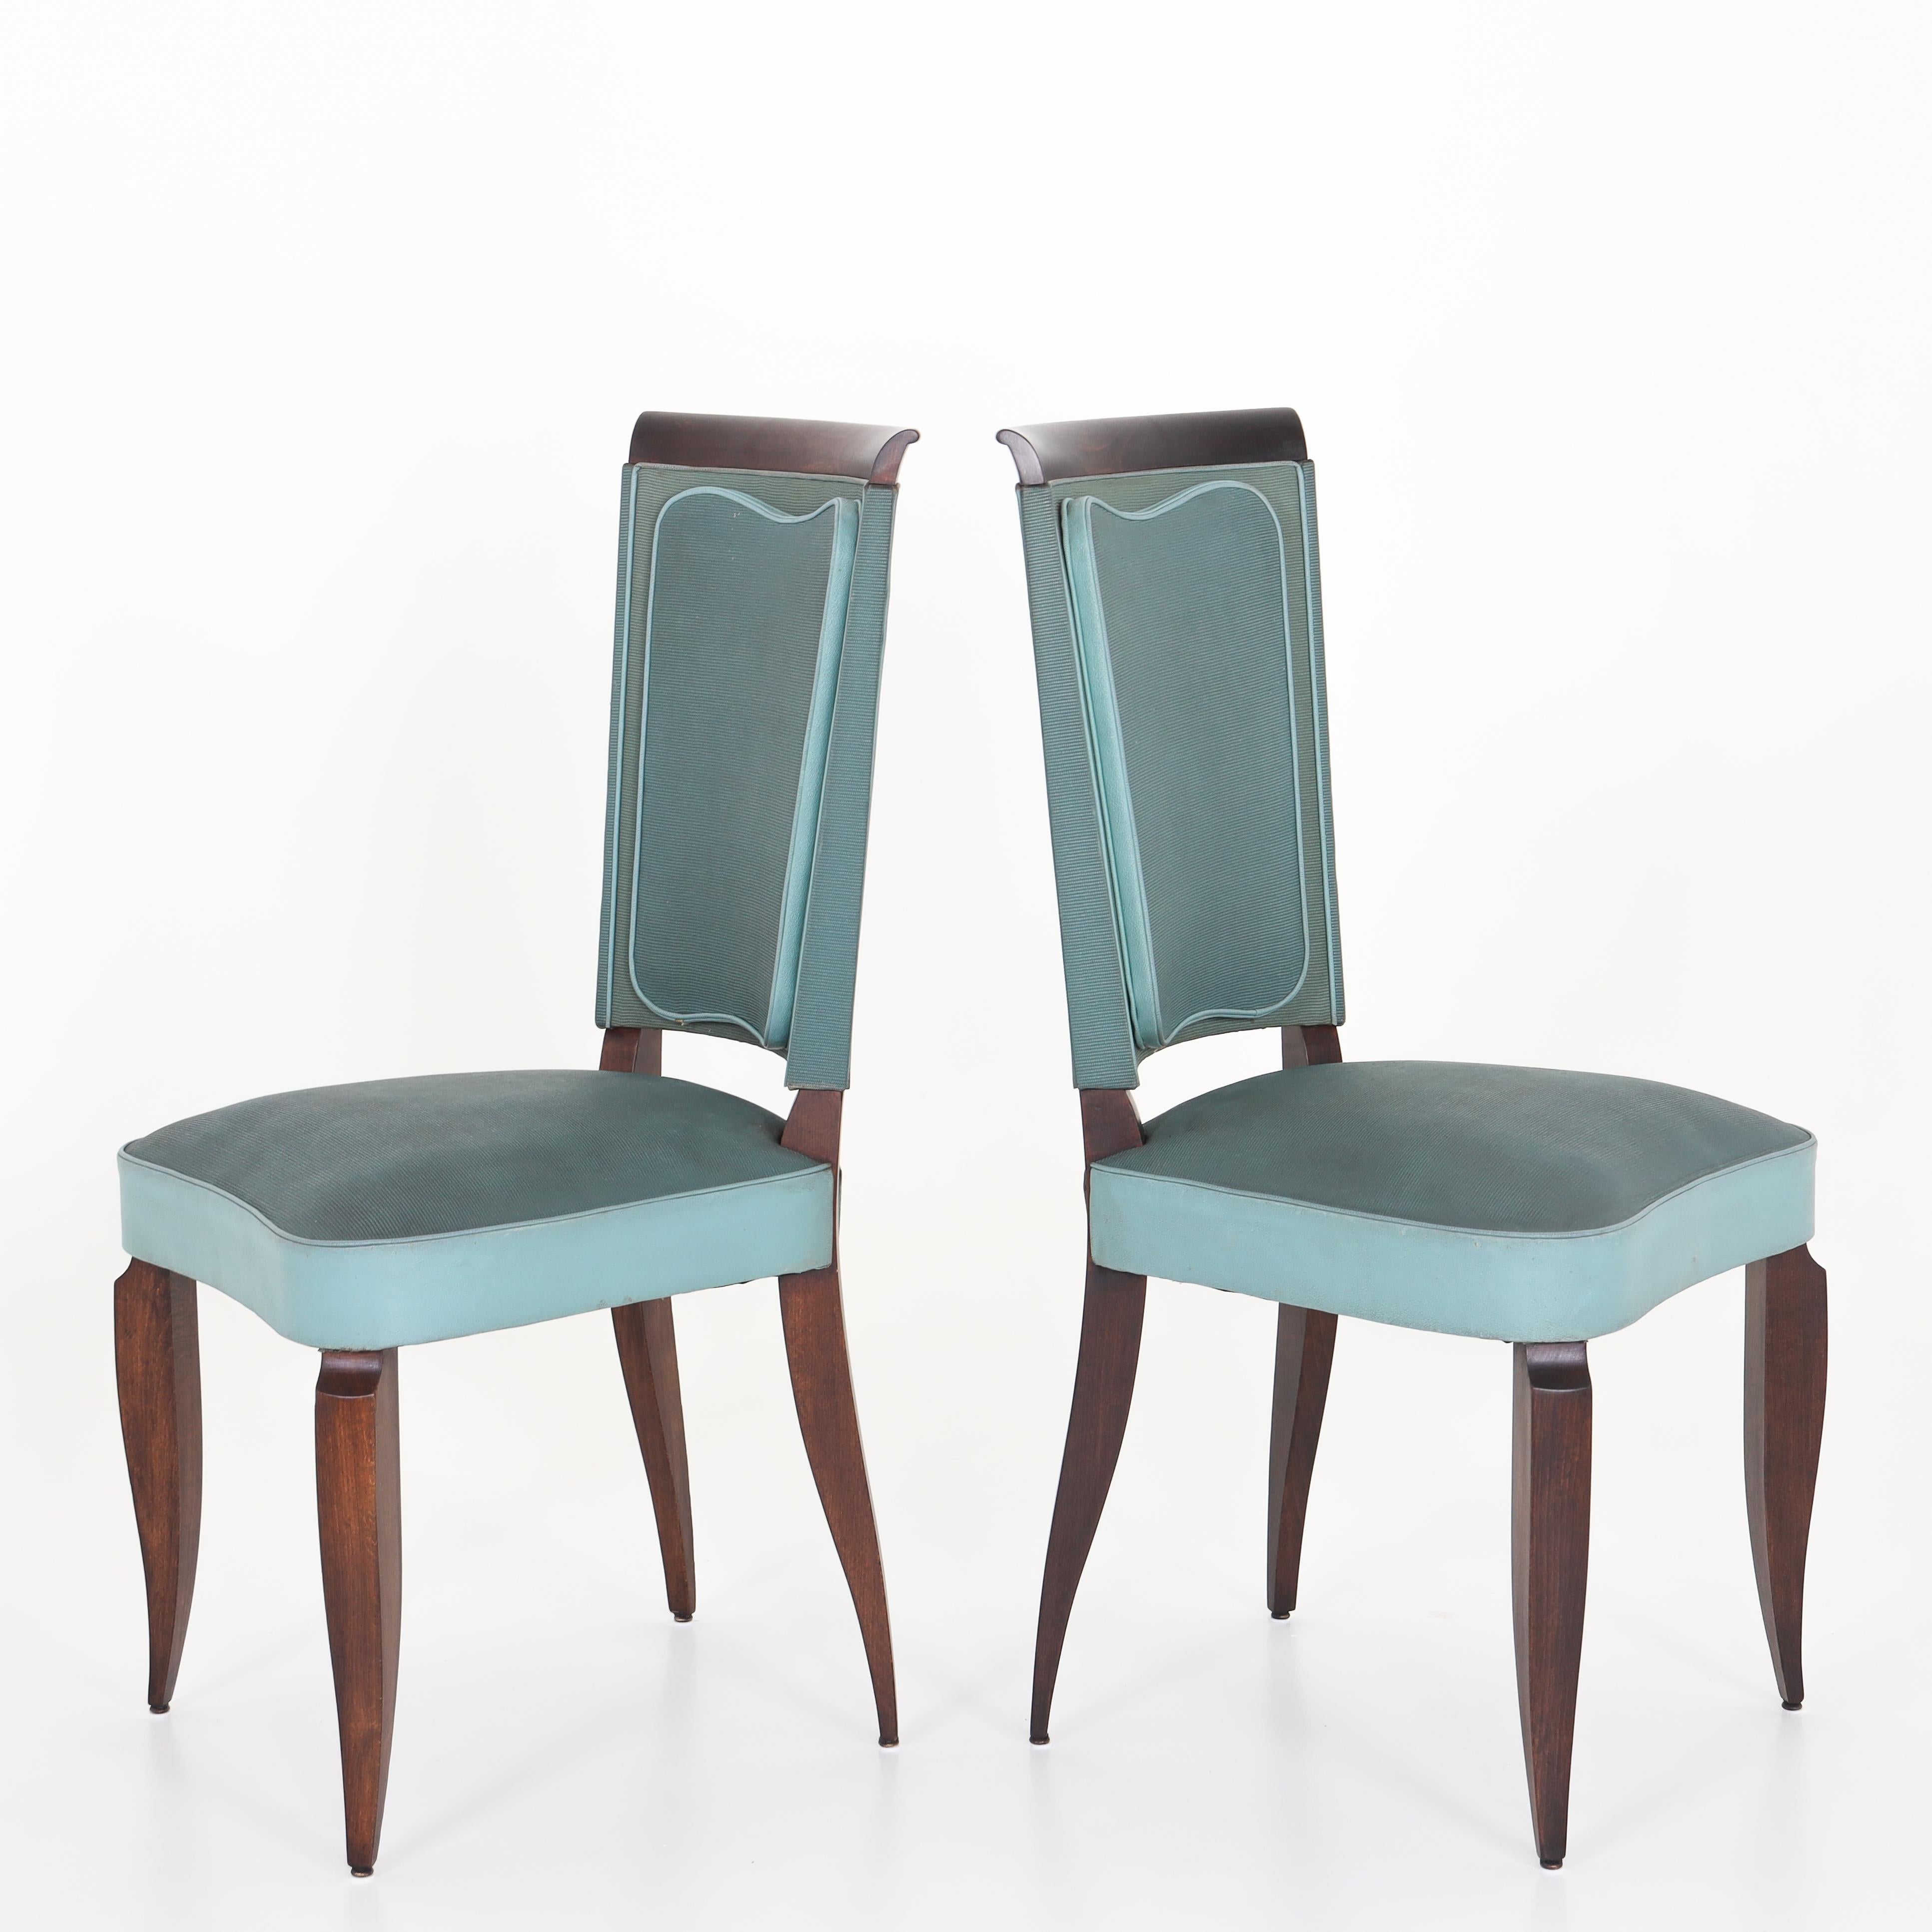 French Art Deco Dining Chairs, France 1920s